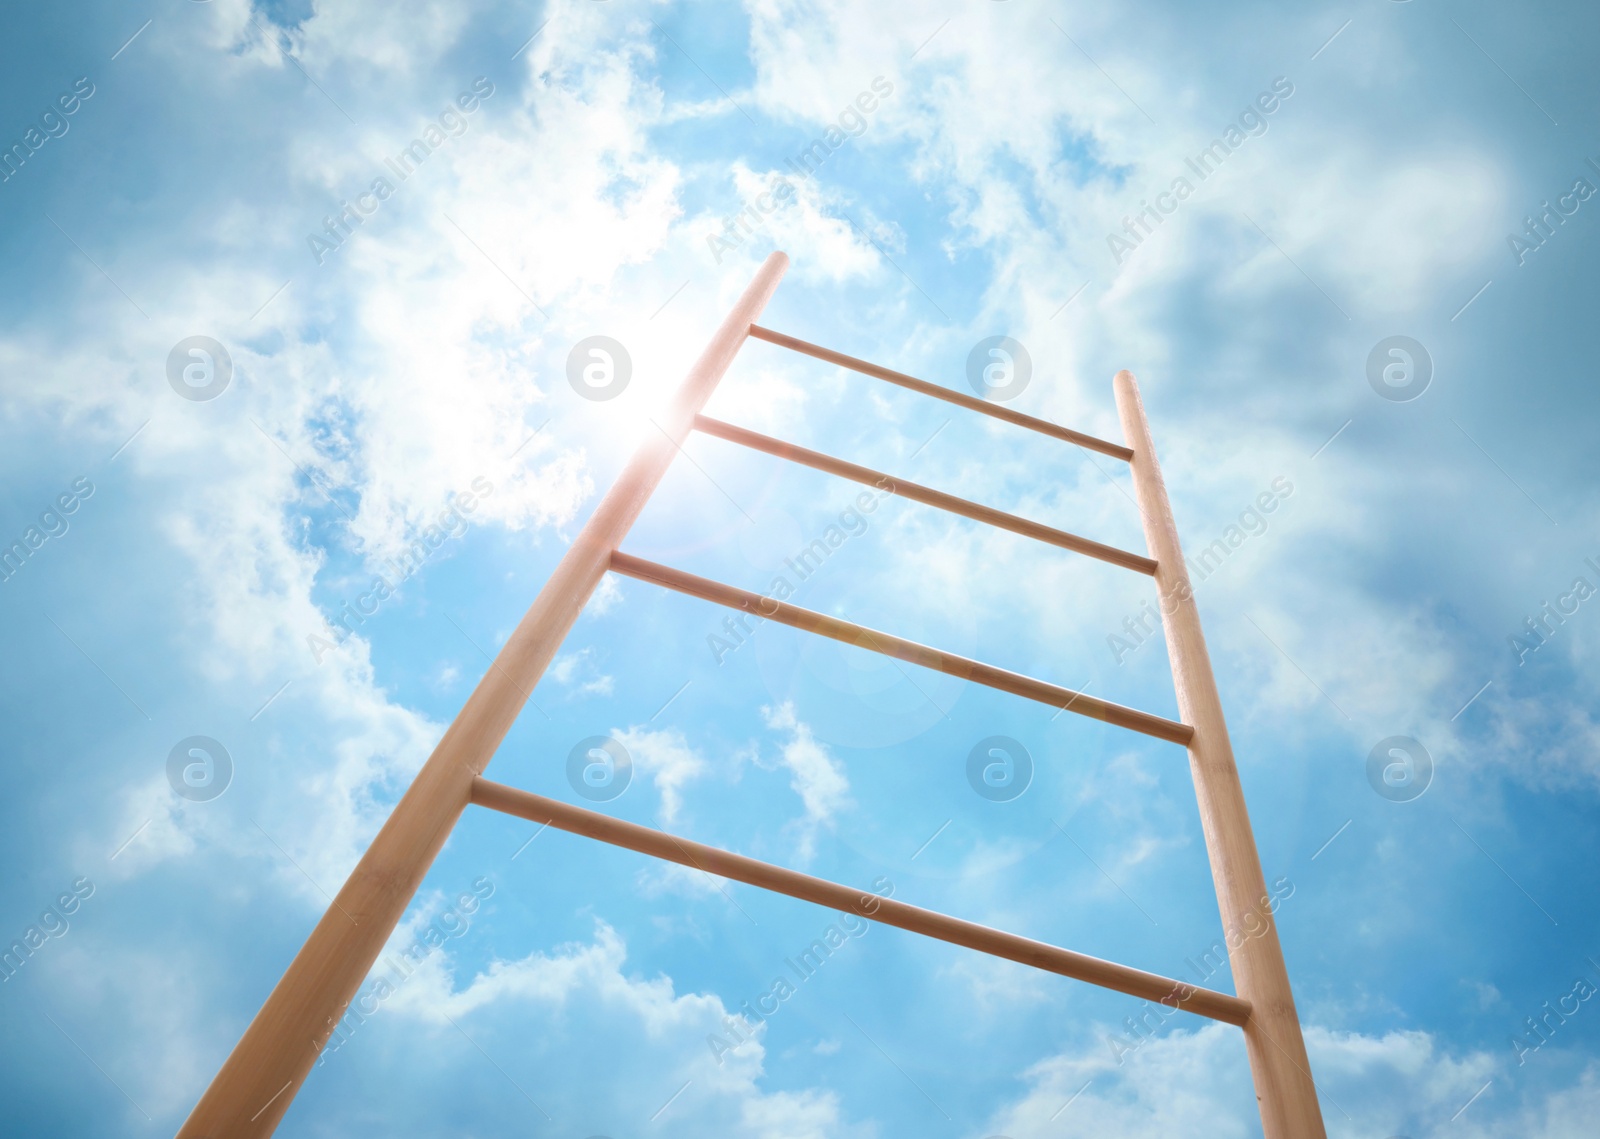 Image of Wooden ladder against blue sky with clouds, low angle view